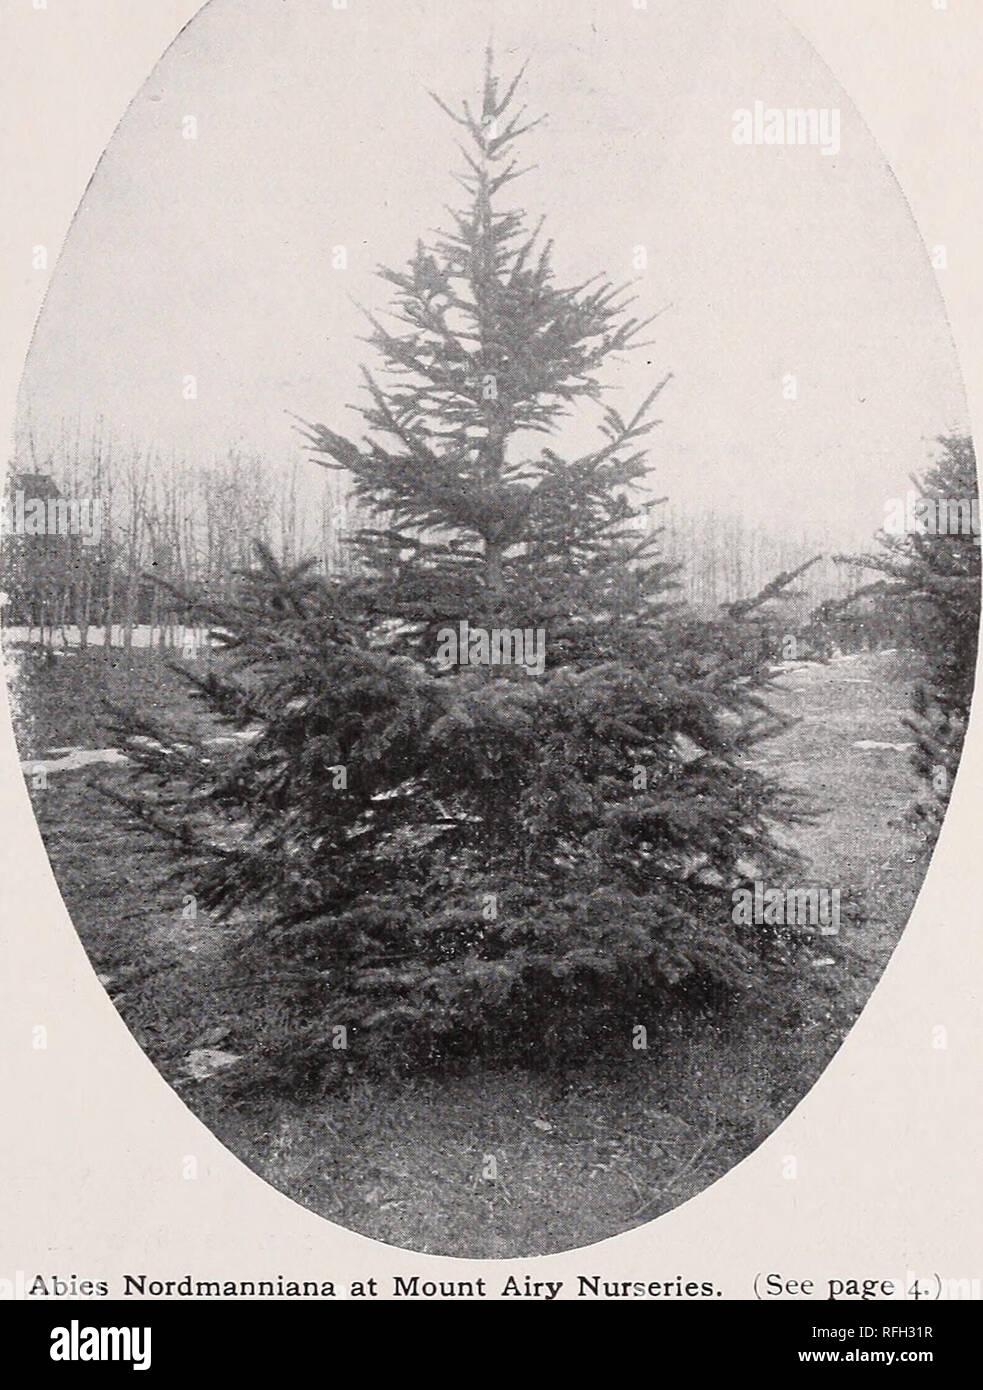 . Mount Airy Nurseries : 1900. Nurseries (Horticulture) Pennsylvania Philadelphia Catalogs; Trees Seedlings Catalogs; Shrubs Catalogs; Plants, Ornamental Catalogs. /nOUNT AIRY NgRSERlES - Evergreens ABIES pinsapo (Pinsapo Fir). An elegant tree, with singular, roundish, sharp-pointed leaves all around the branches and shoots. A. polita (Tiger's Tail Spruce). A beautiful species of decided individuality ; a slow grower ; forms a perfect pyramidal bush, densely clothed with stiff, spiny, dark leaves. BIOTA Orientalis compacta (Compact Chinese Arborvitae). A variety of the Chinese, but more dwarf  Stock Photo